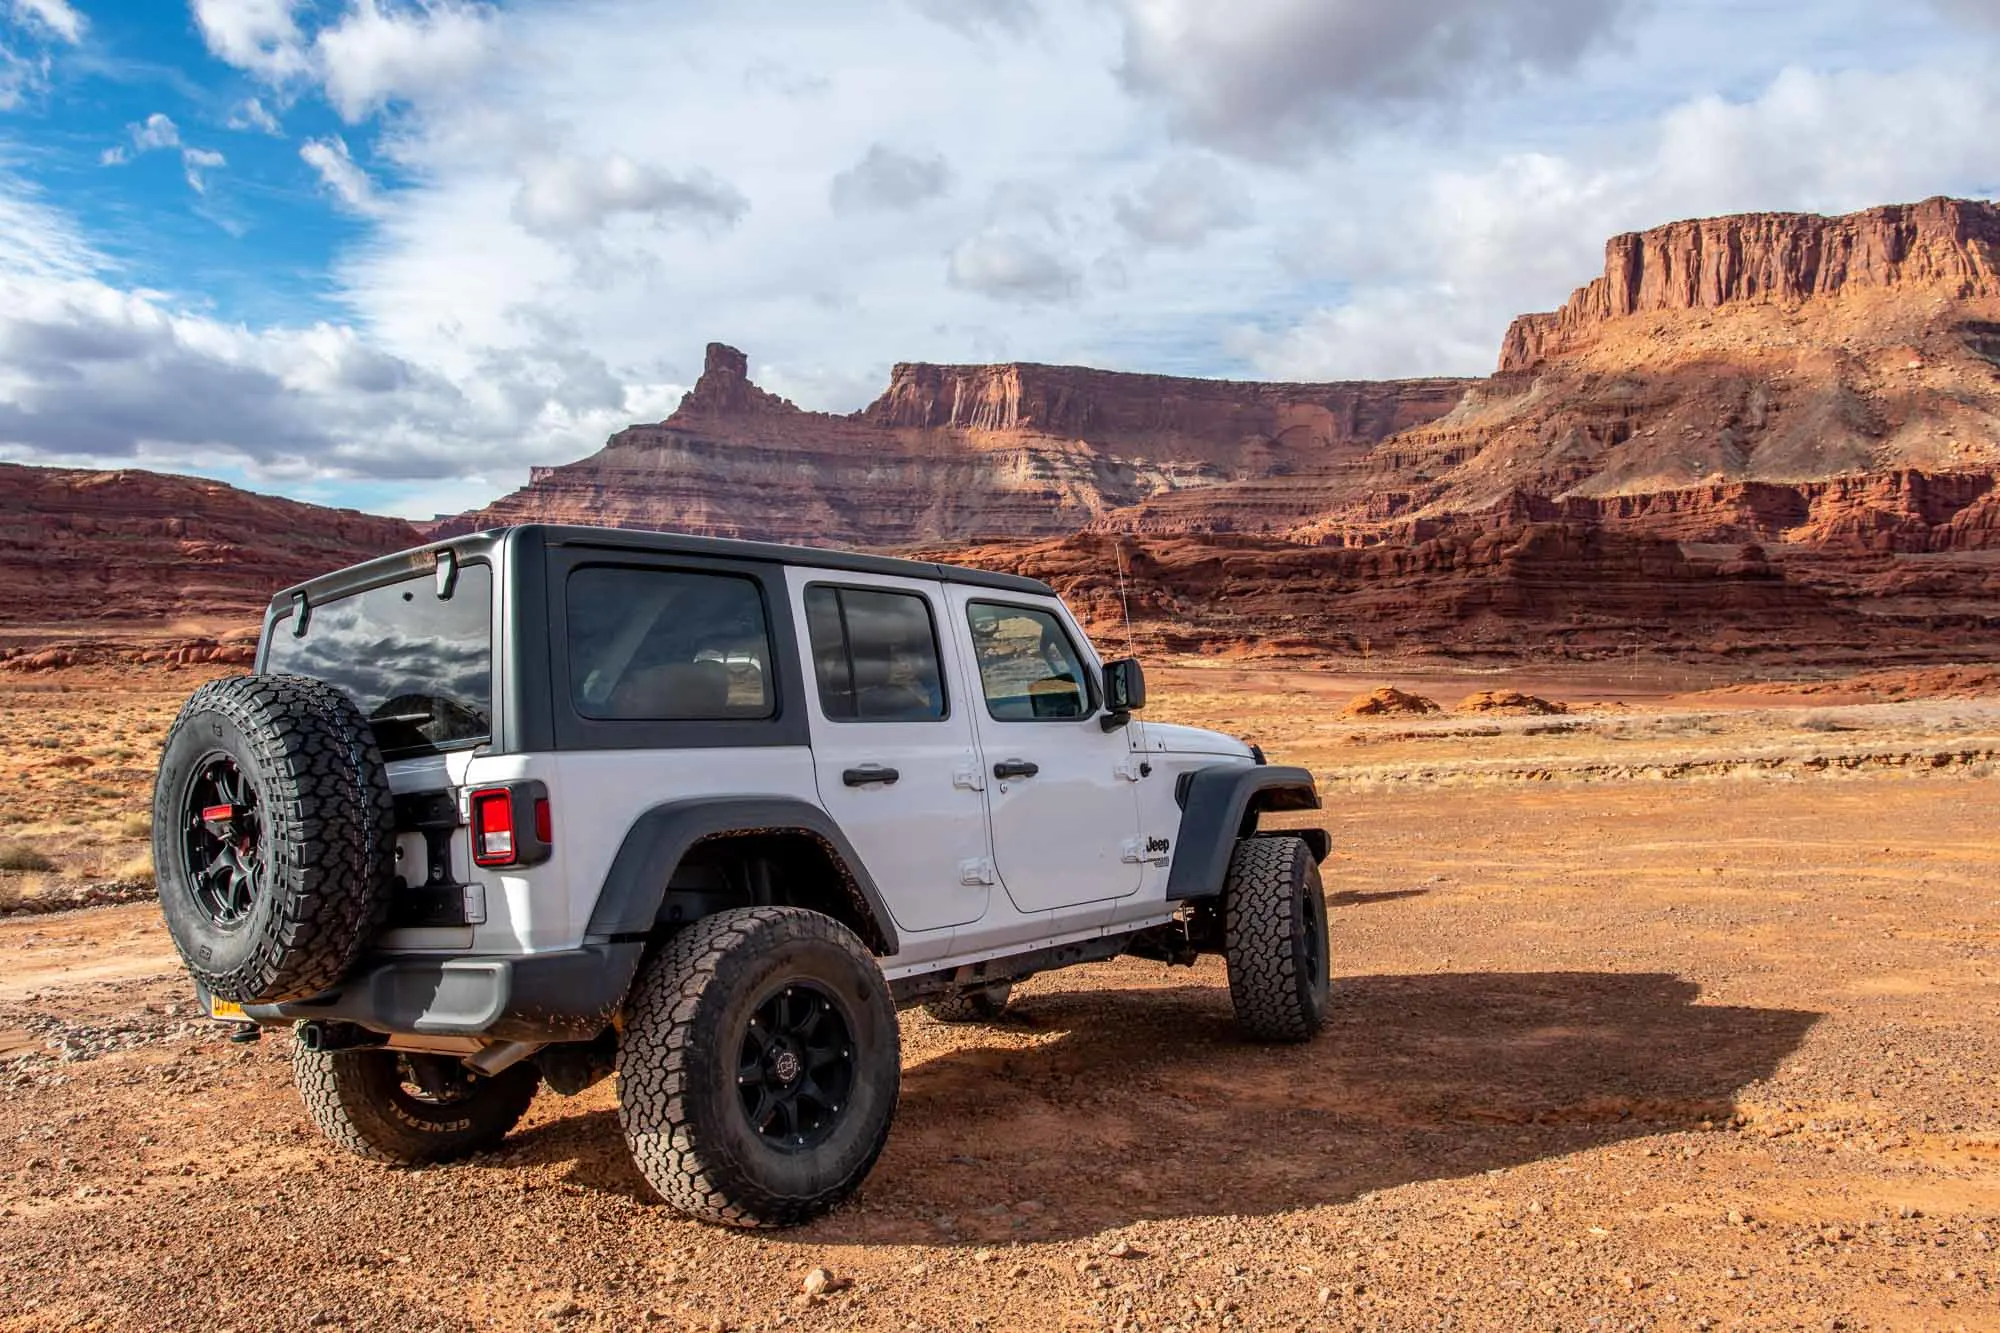 White Jeep in front of red rock cliffs